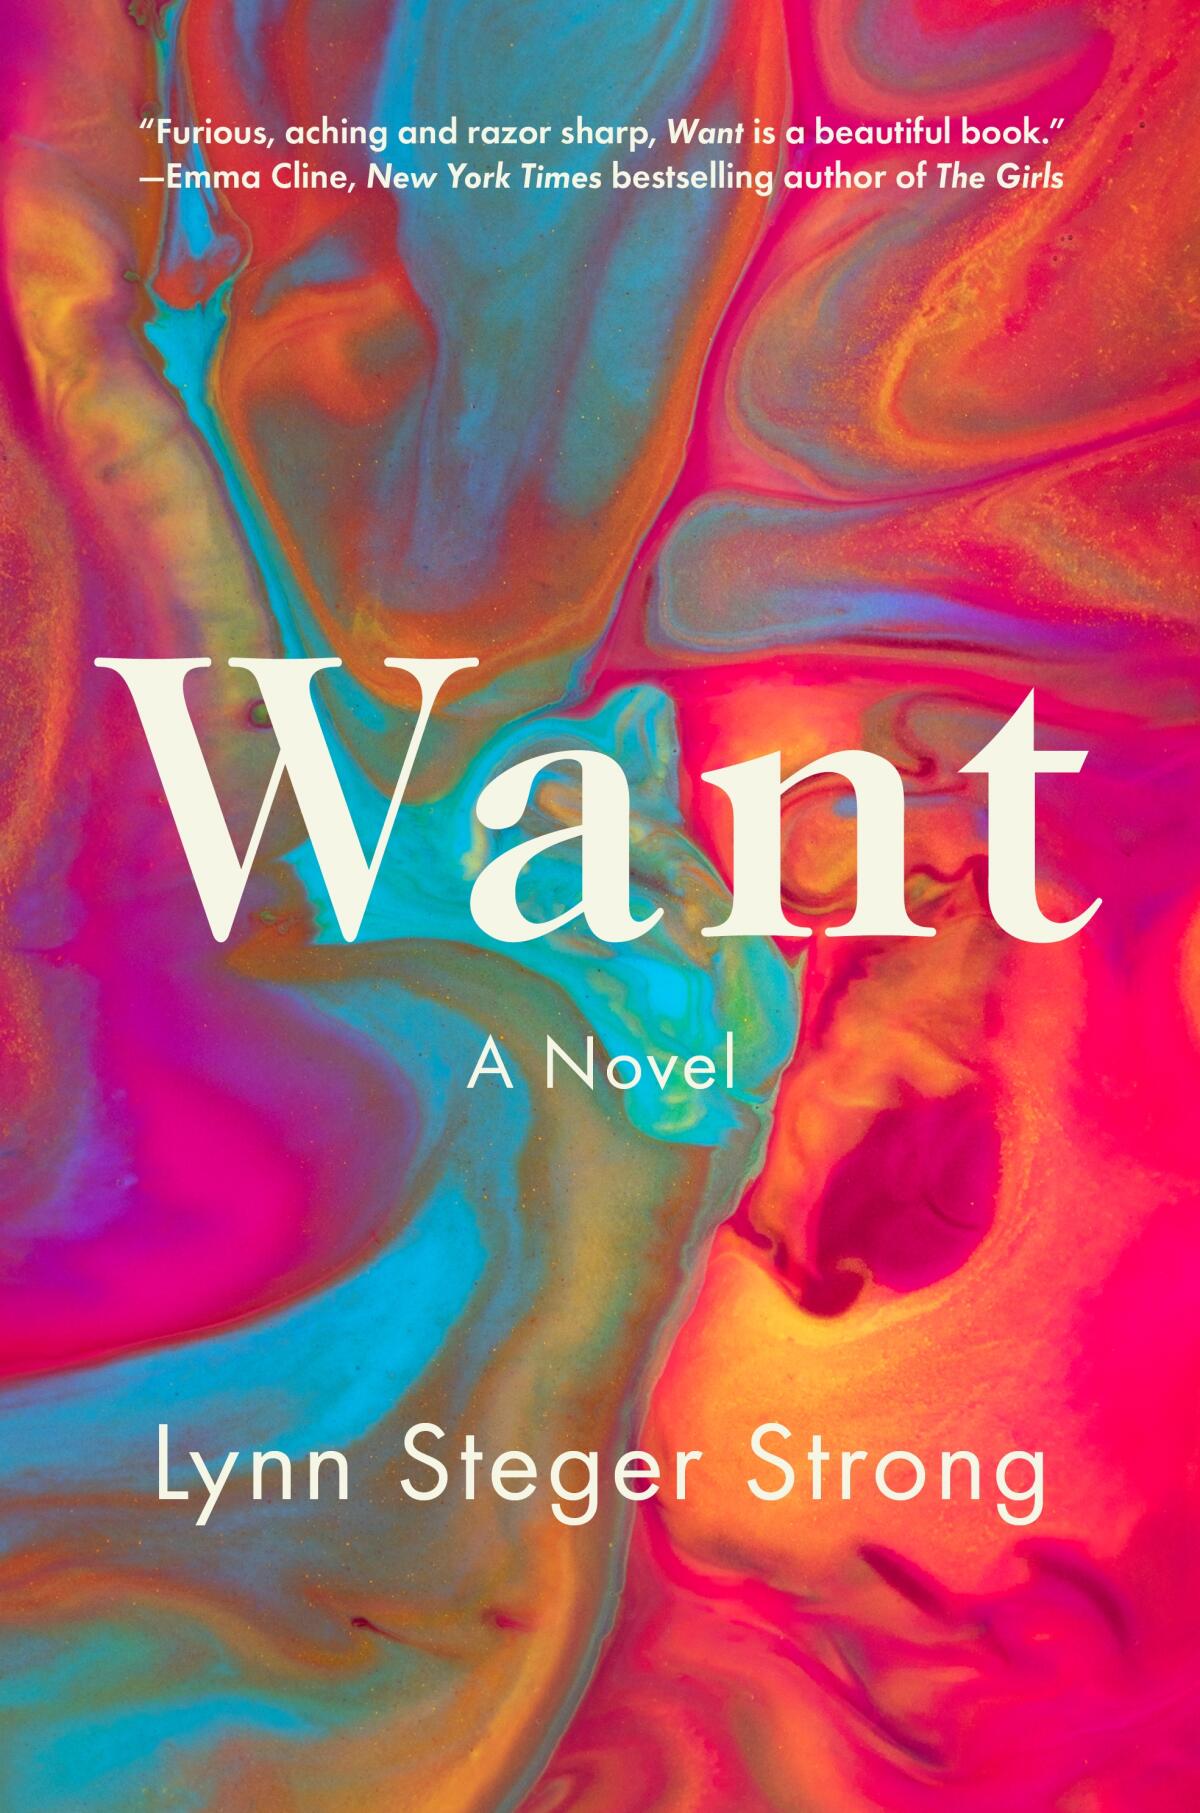 A book jacket for Lynn Steger Strong's "Want."